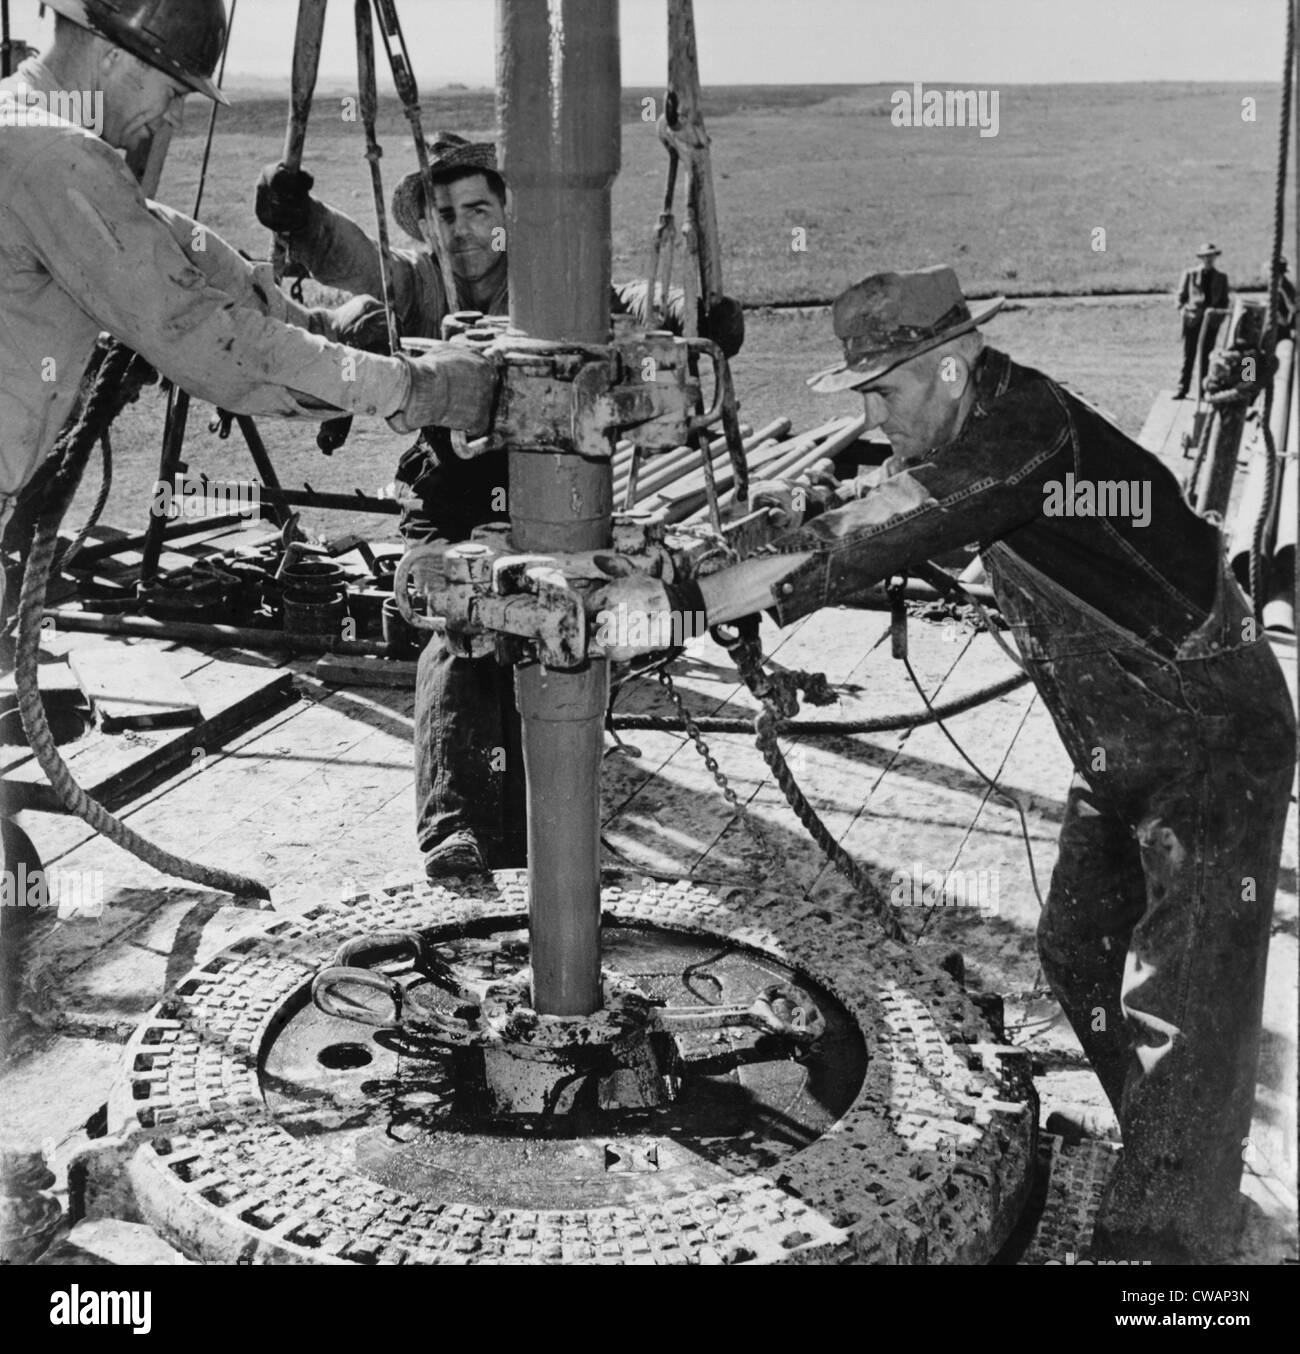 Oil well worked by 'wildcat' drillers. Roughnecks, as derrick workers were called, use tools called 'tongs' which are clamped Stock Photo